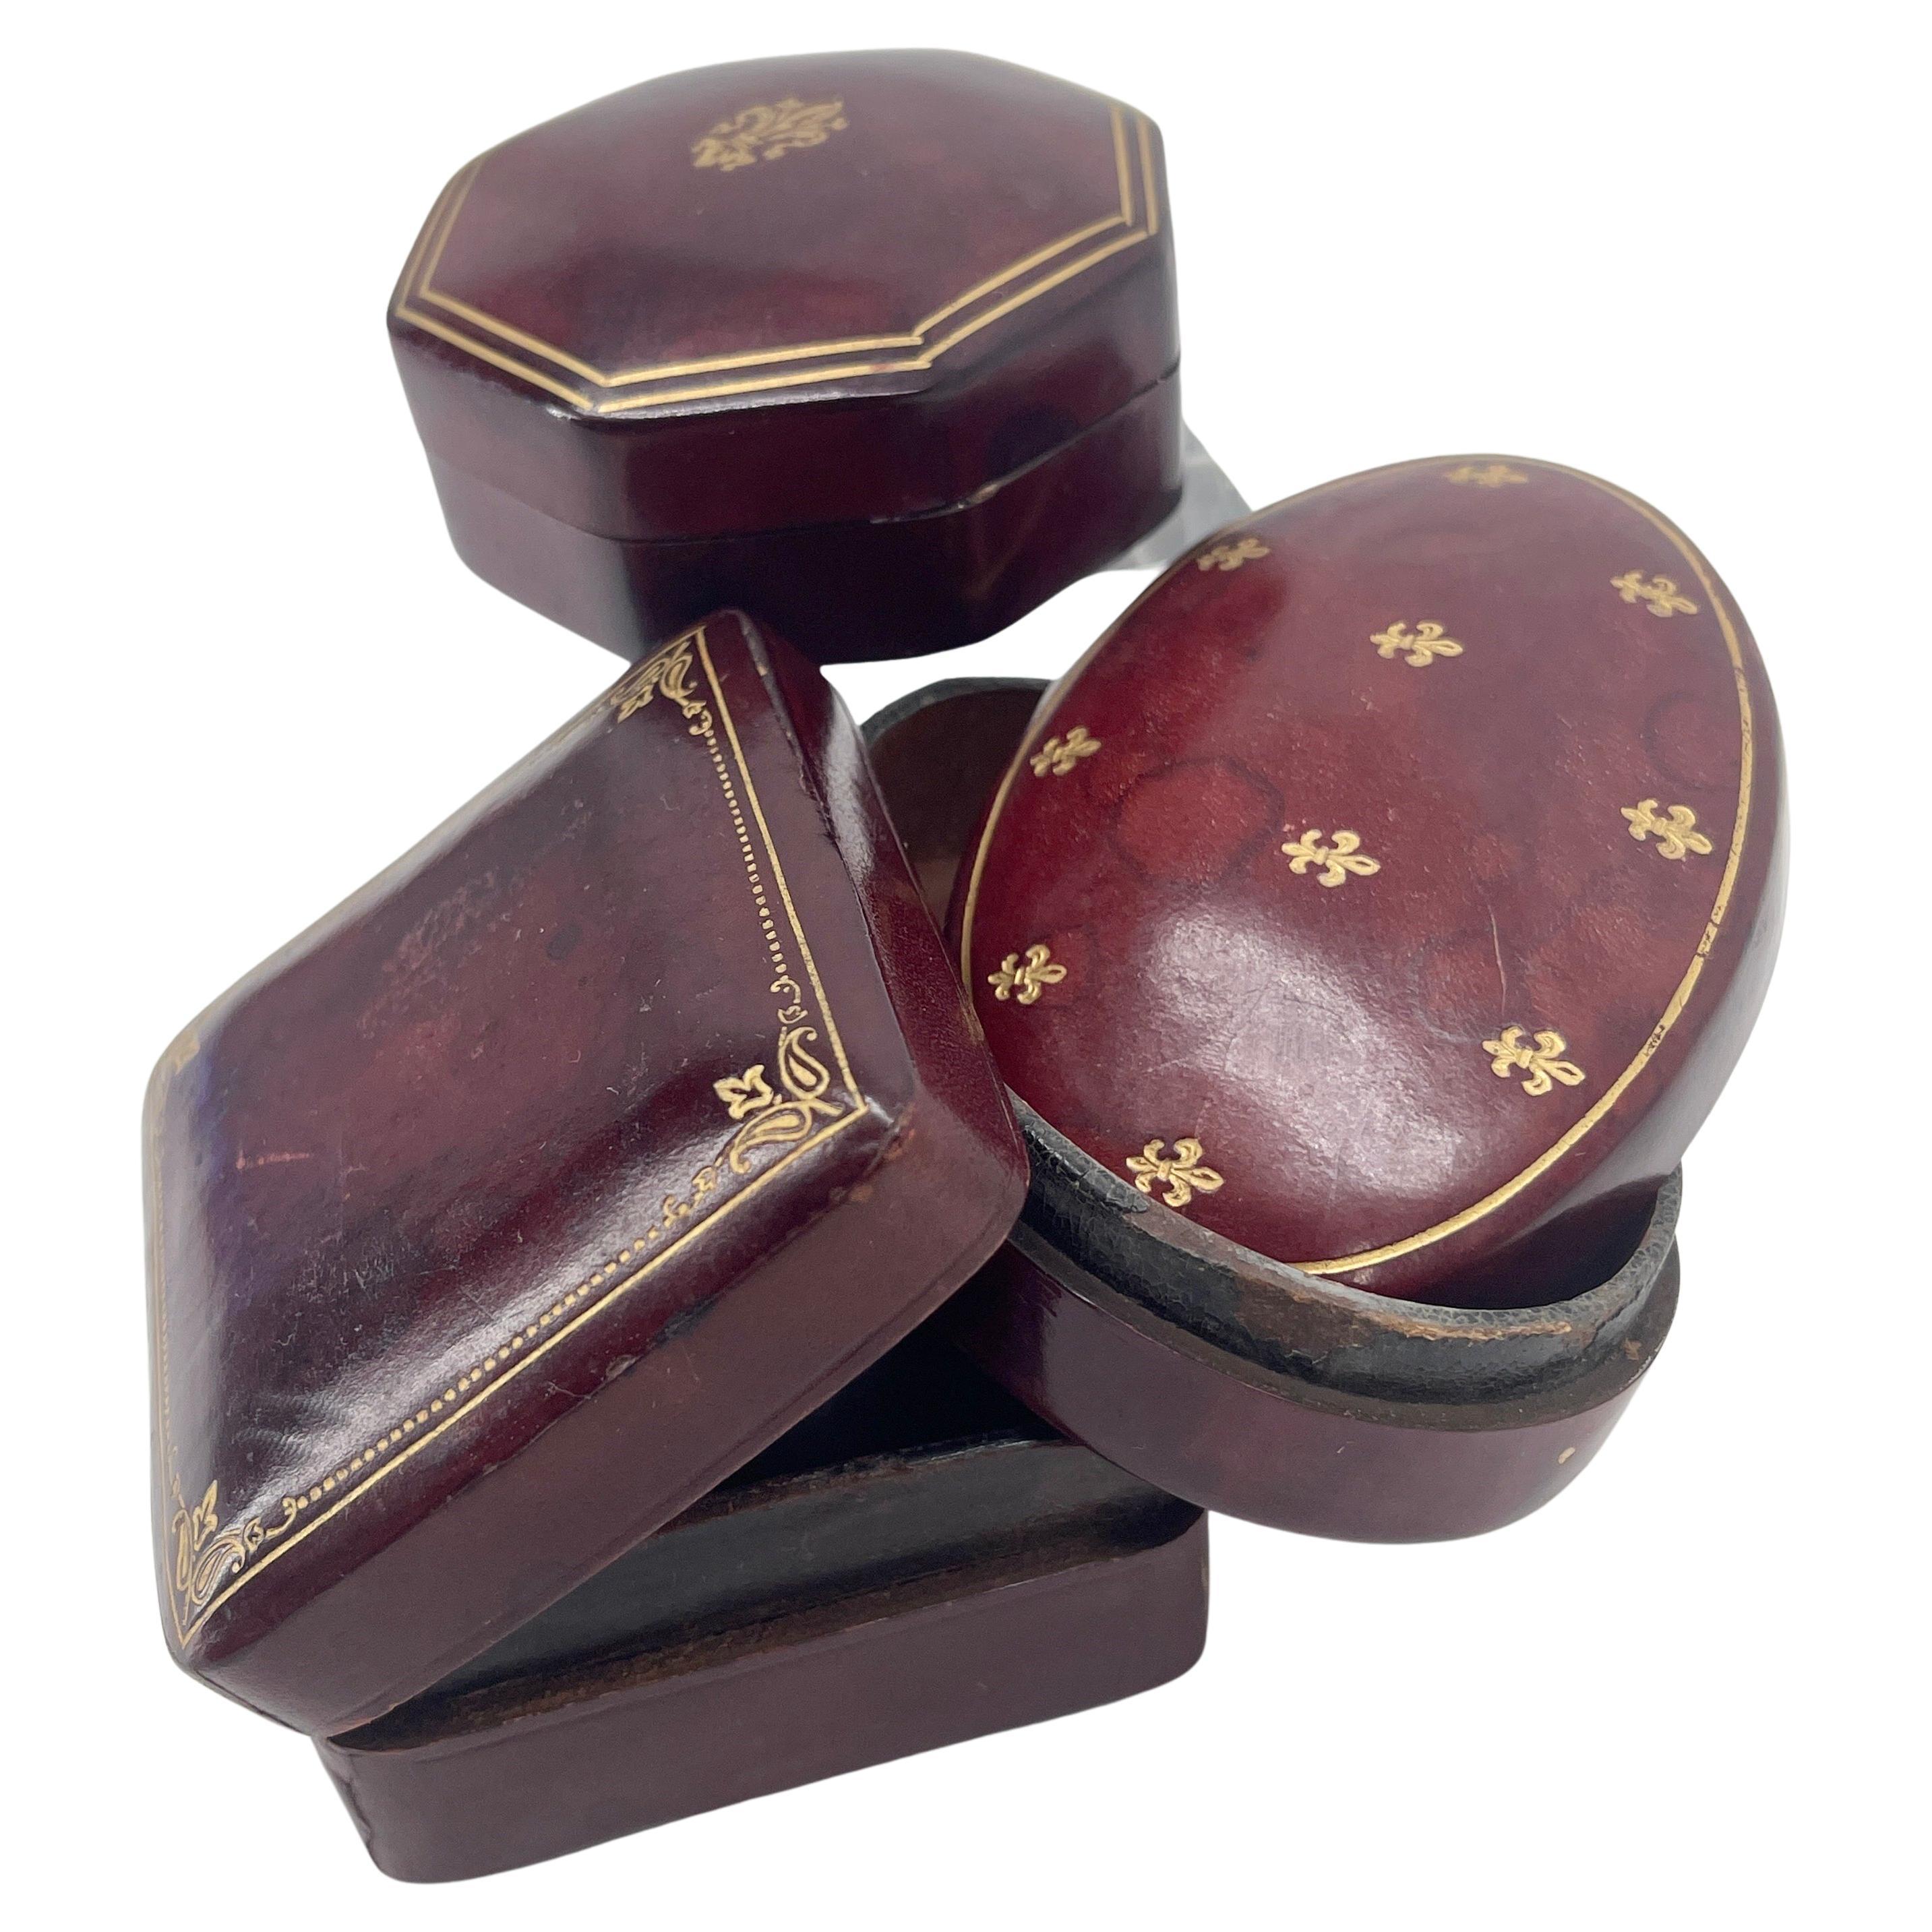 Three Small Mid-Century jewelry boxes, Italy, Circa 1930's.
The 3 small boxes are hand crafted in red leather and gold embossed with fleur-de-lis decoration. Some of the boxes are marked 